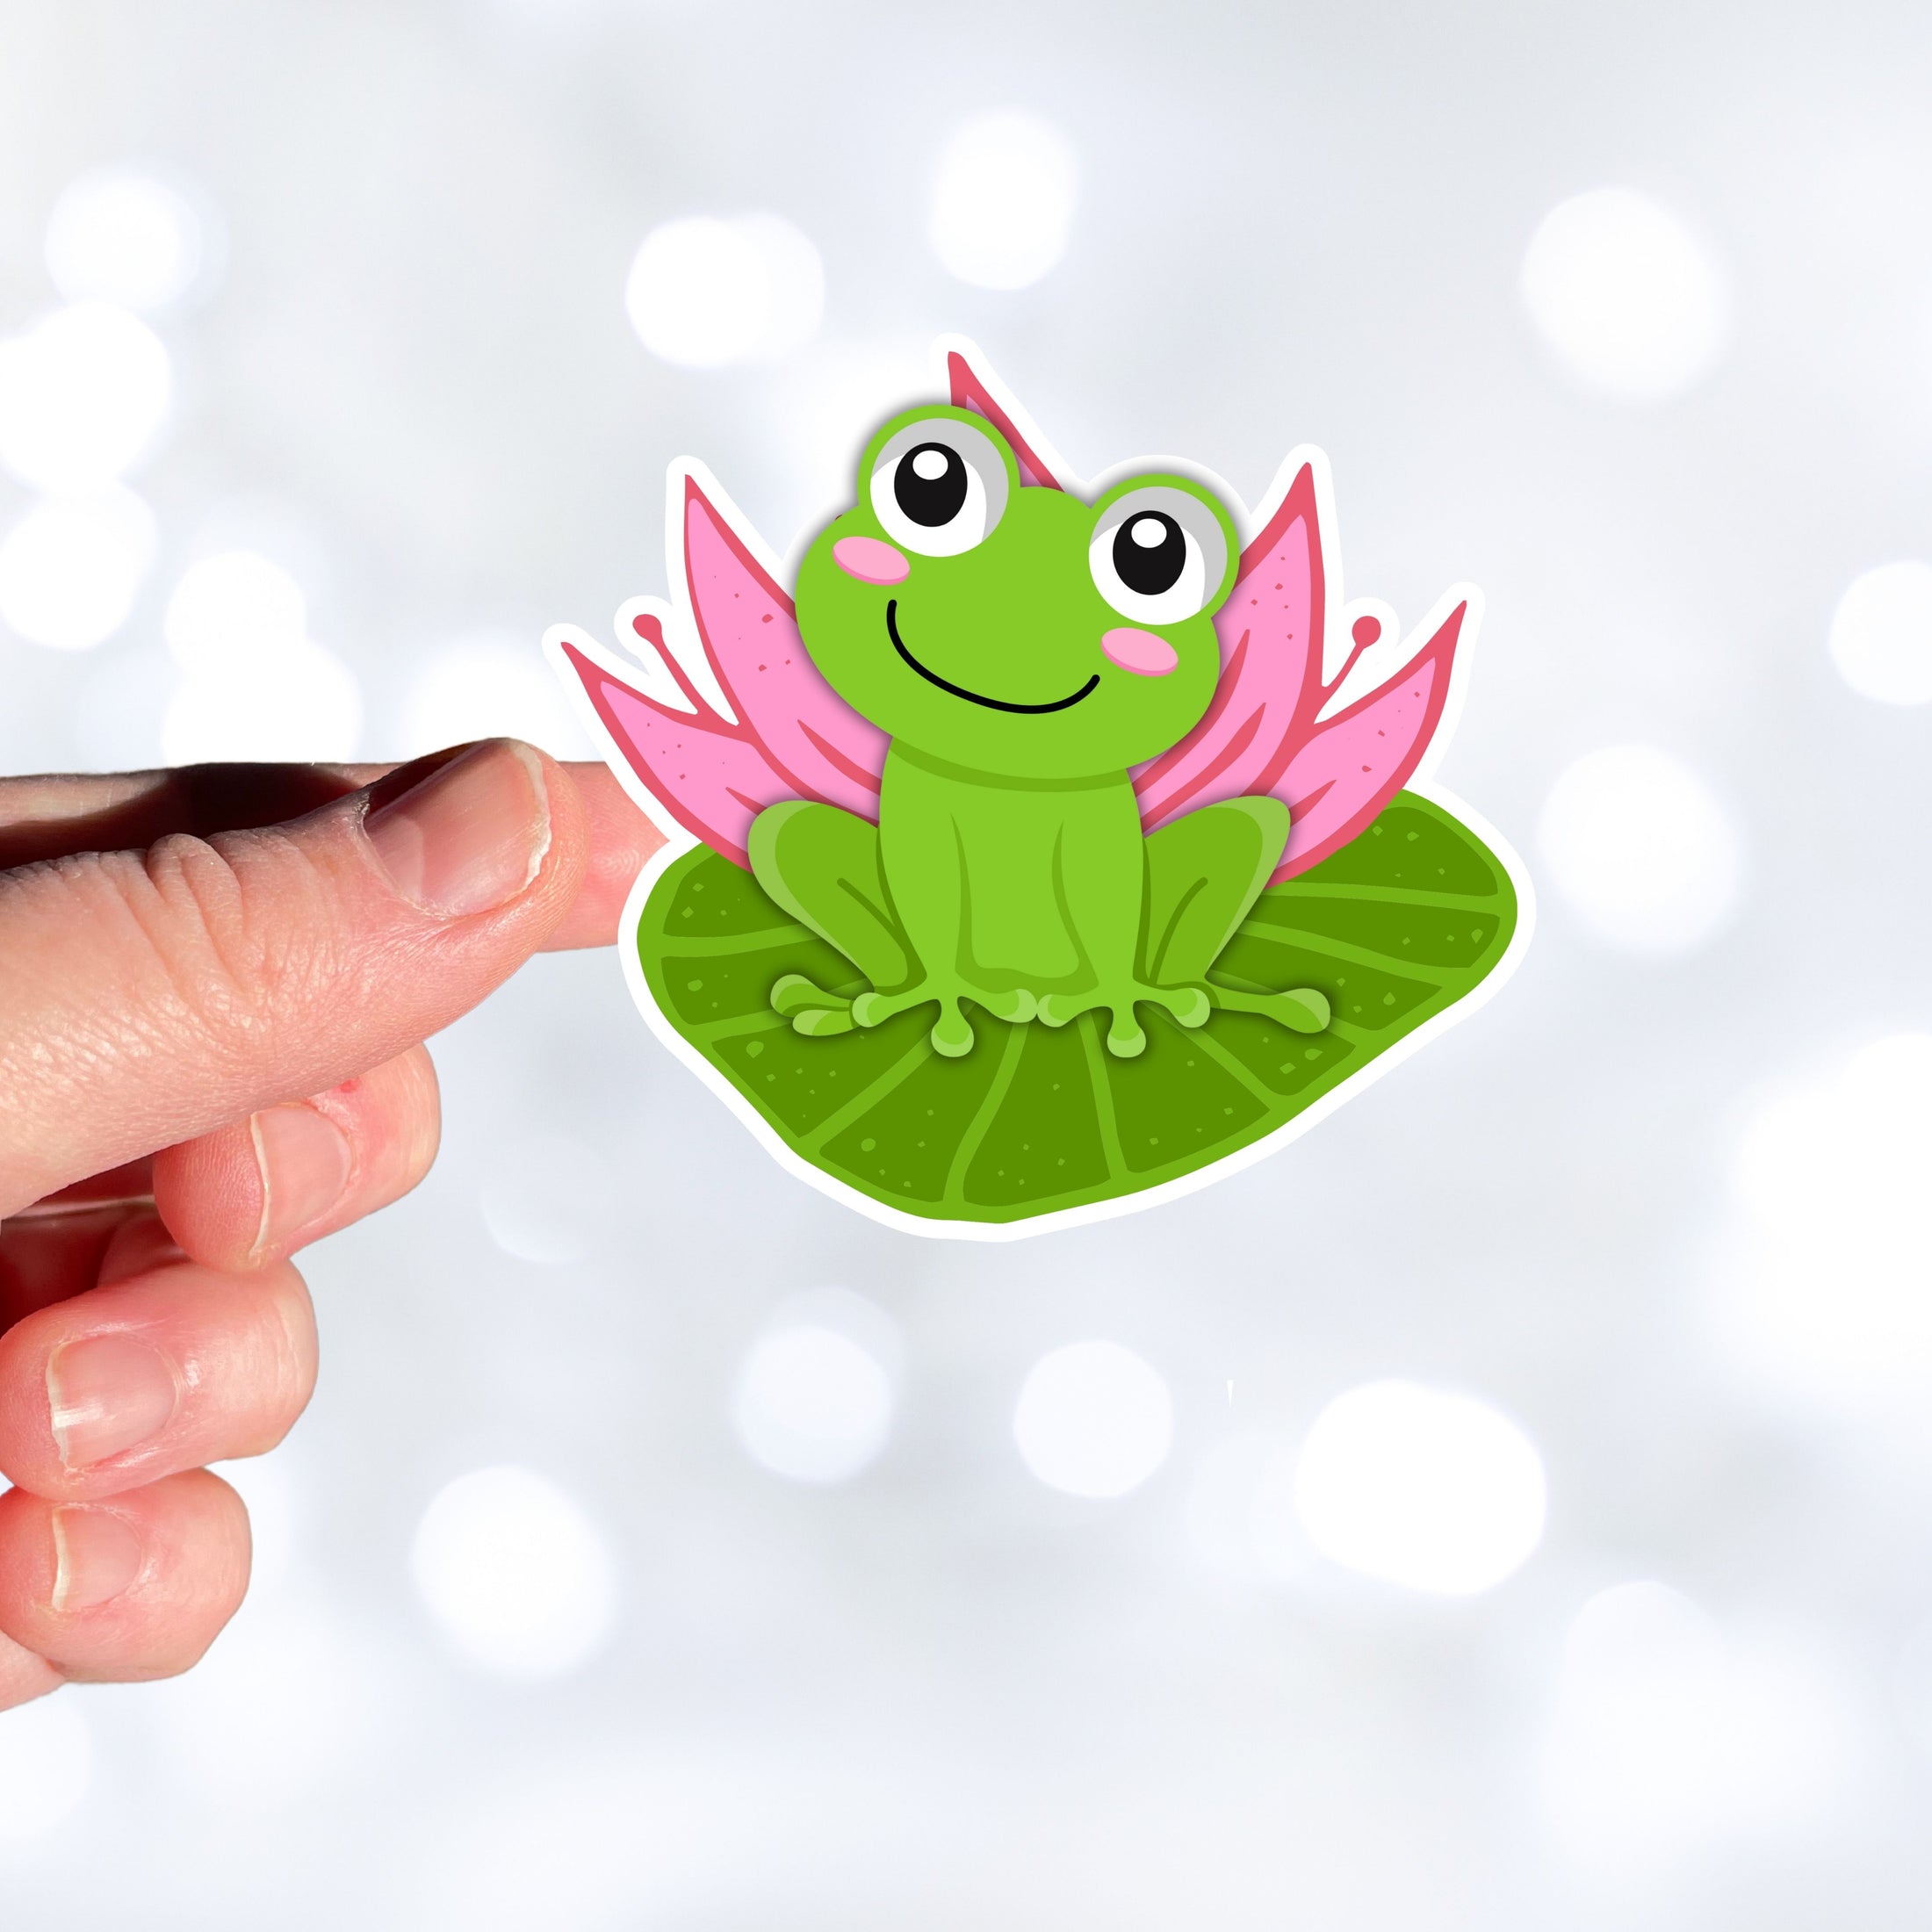 This image shows a hand holding the froggy on a lily pad sticker.